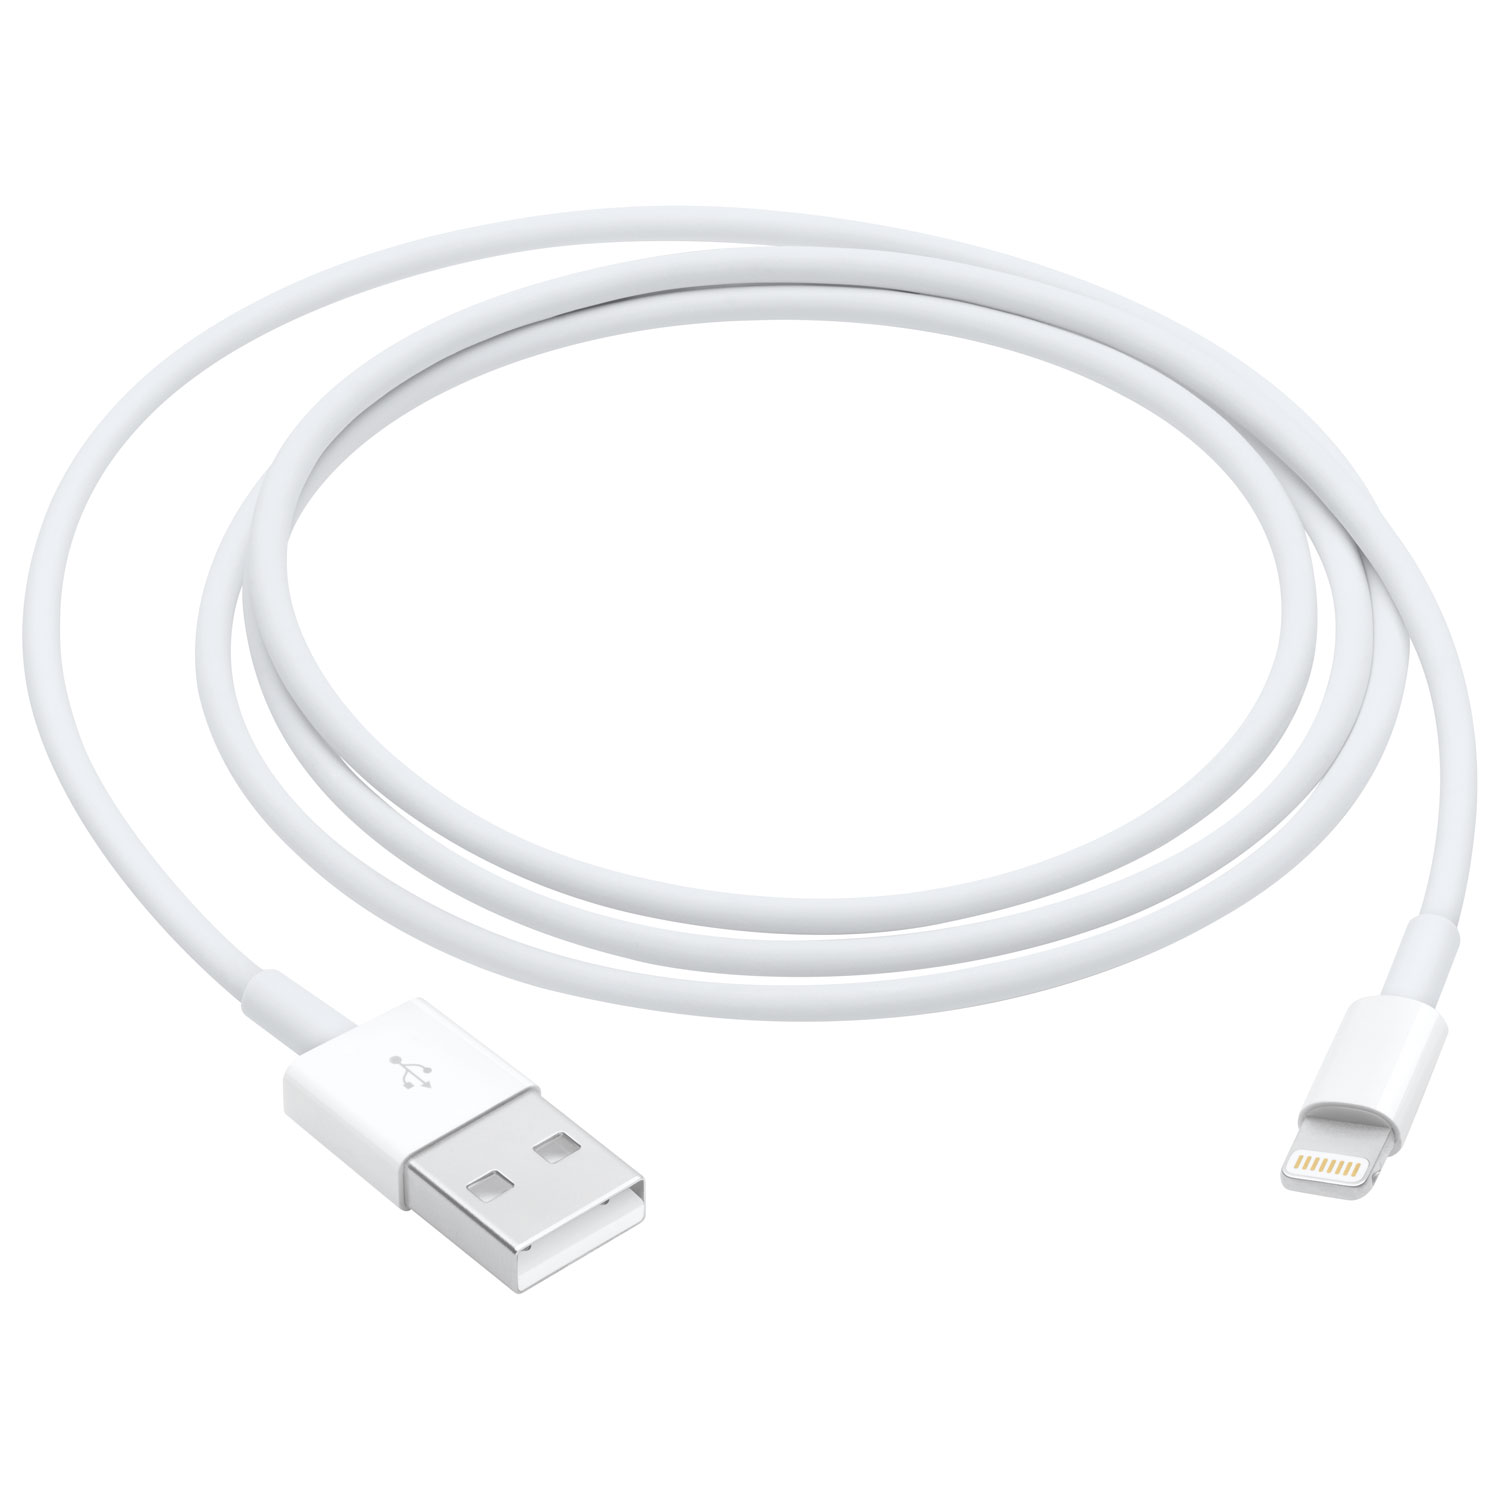 Apple 1m (3.28 ft.) USB/Lightning Cable (MXLY2AM/A) - White